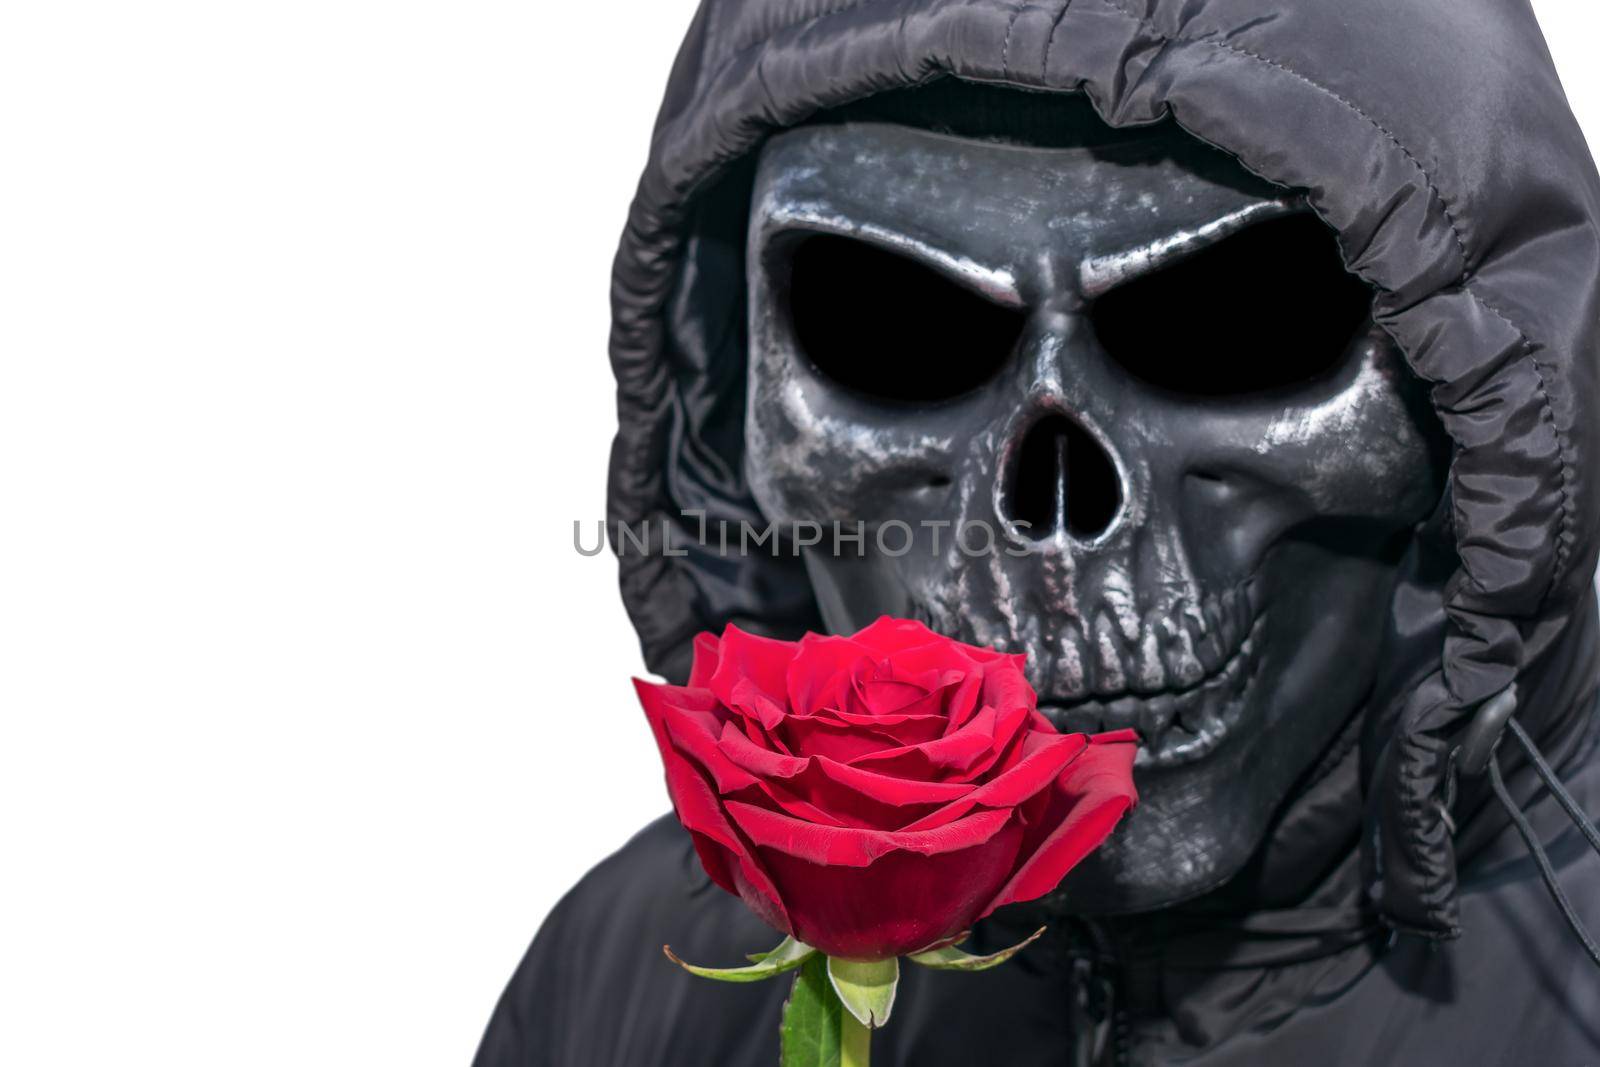 Red rose on the background of a man in a death mask and a hood in the Gothic style for Halloween